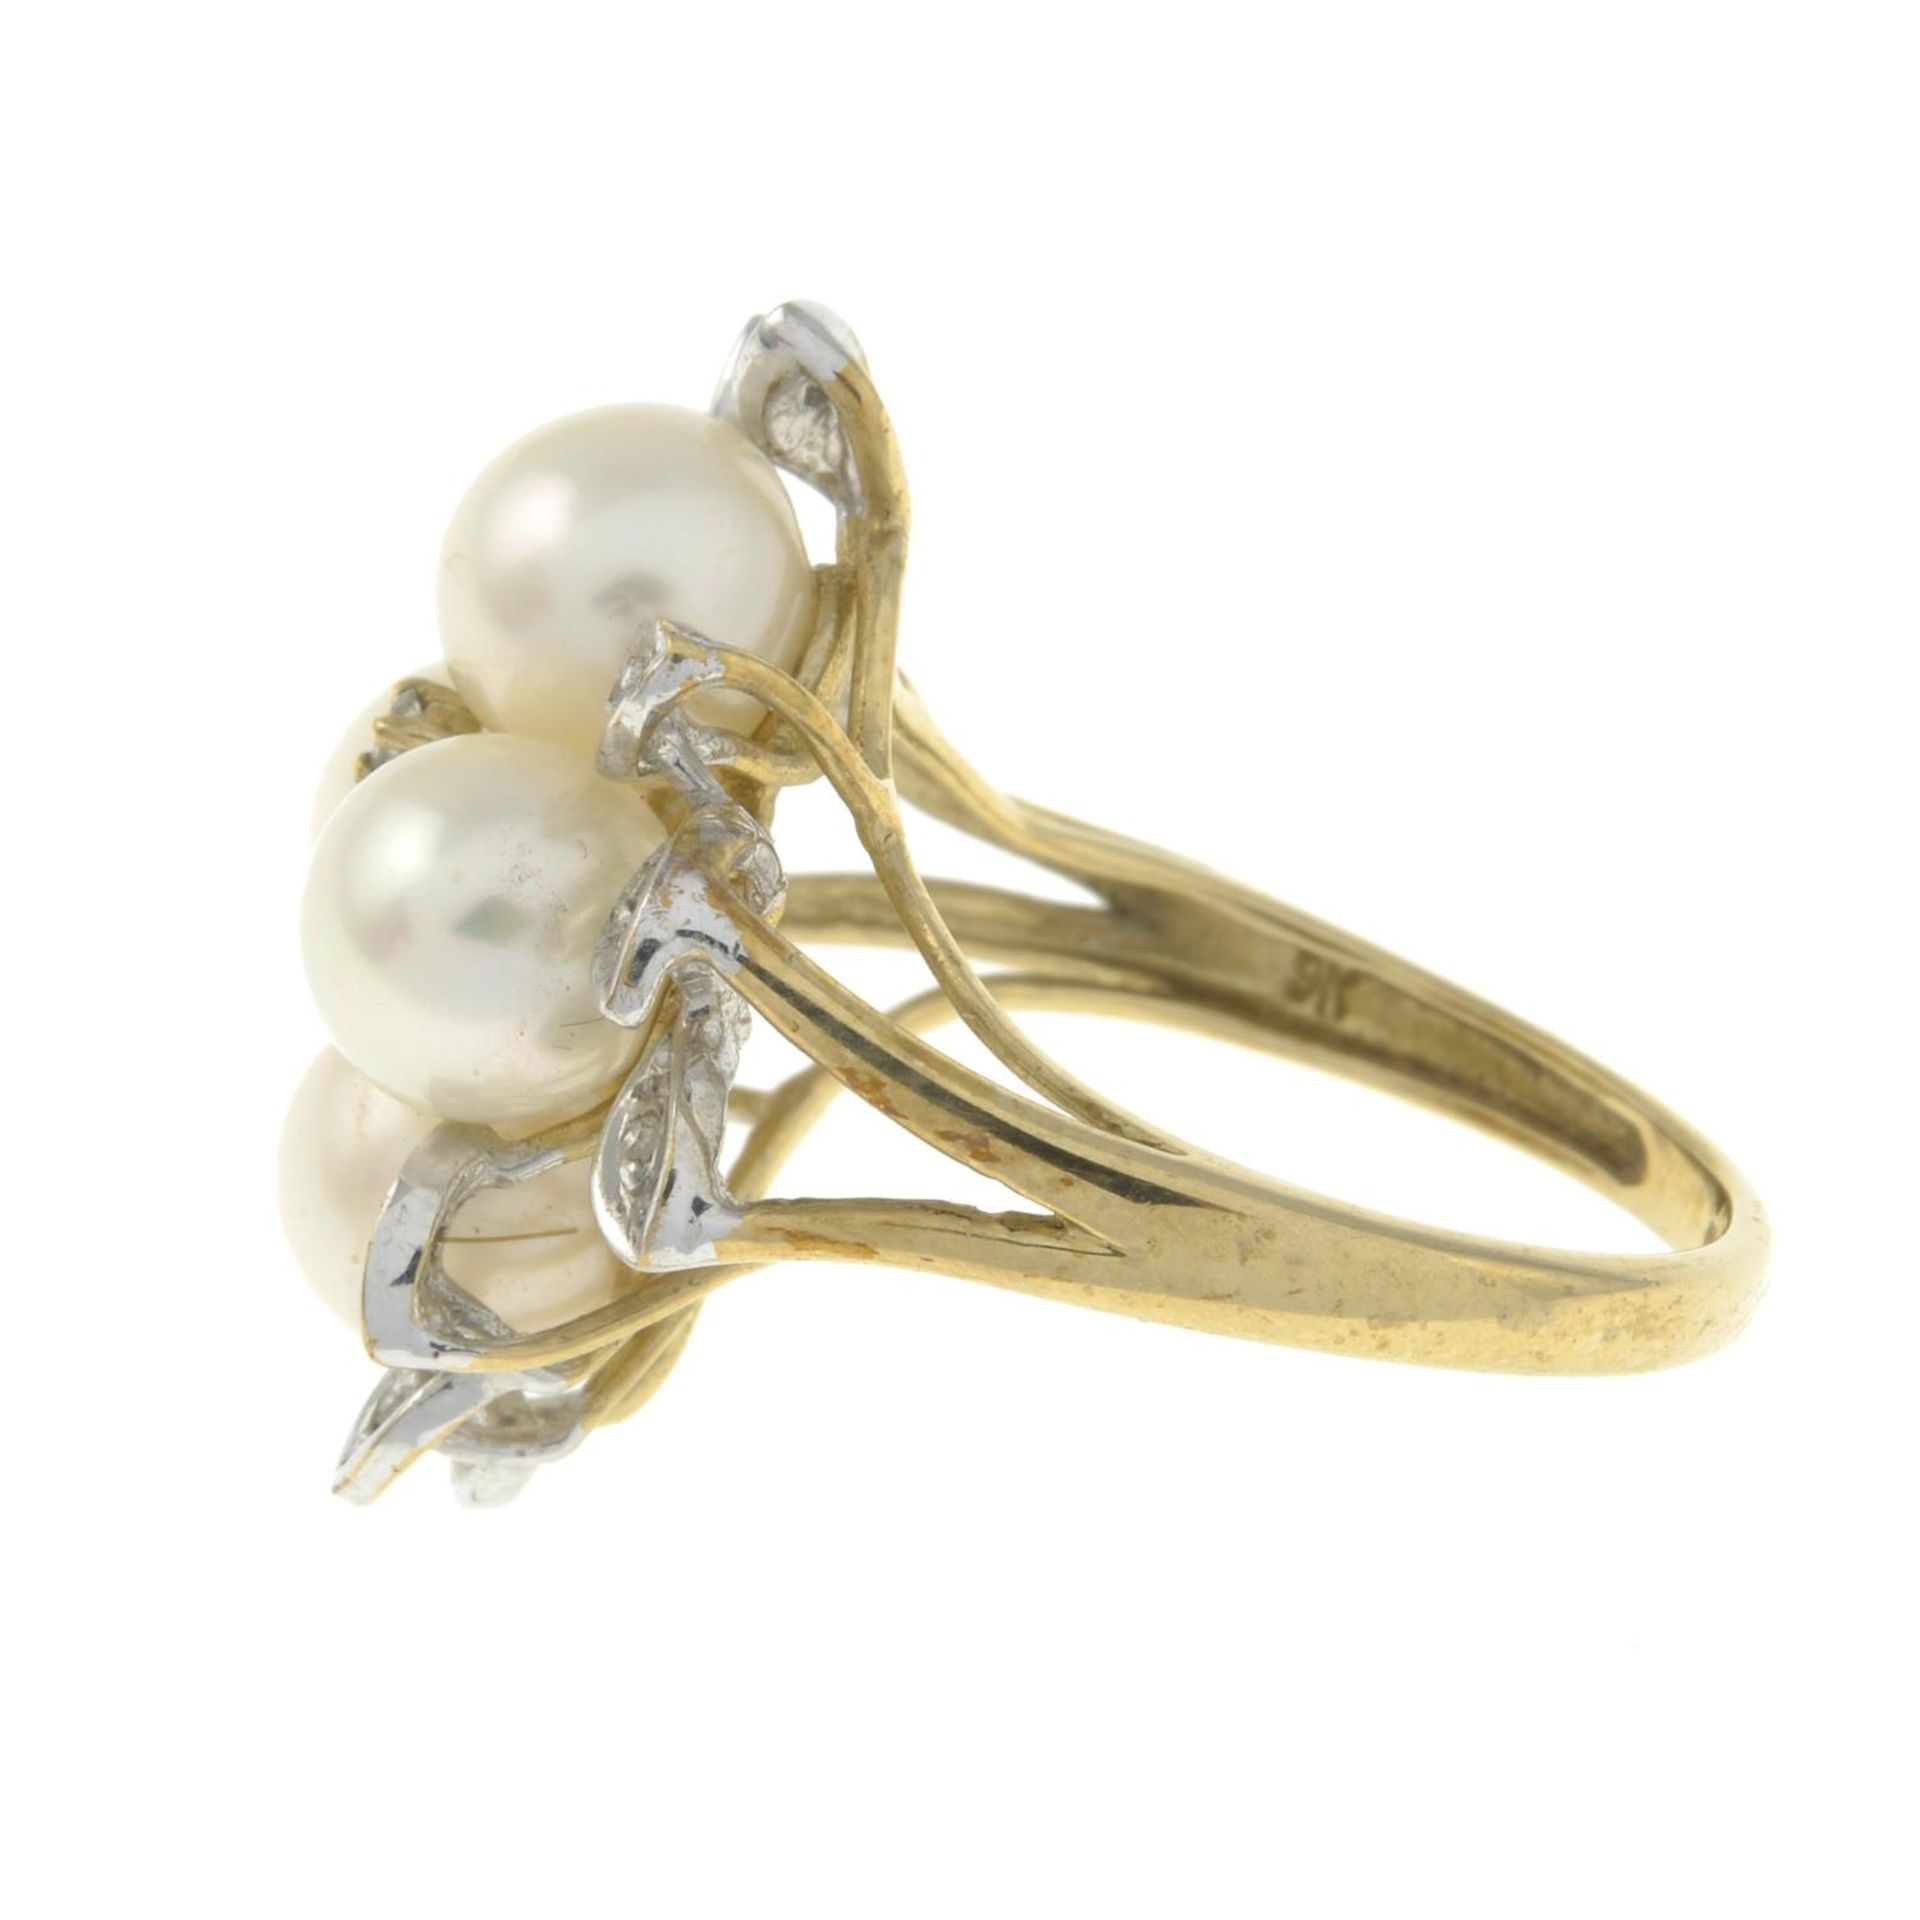 A 9ct gold cultured pearl and diamond floral dress ring.Hallmarks for 9ct gold. - Image 3 of 3